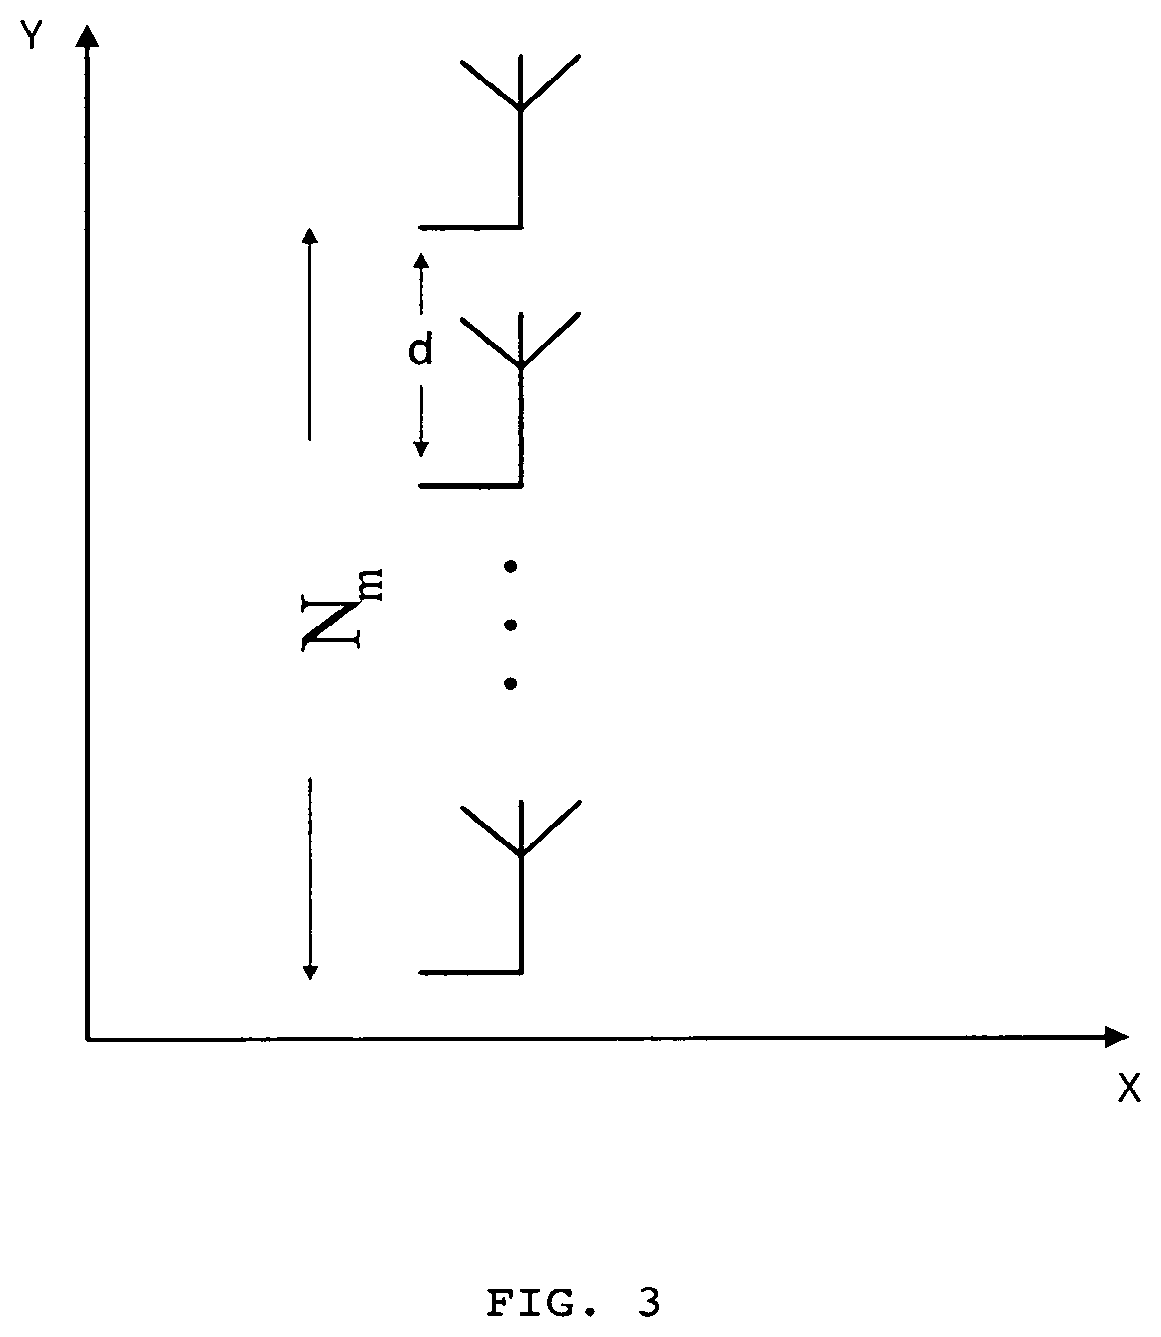 Transmission method with double directivity